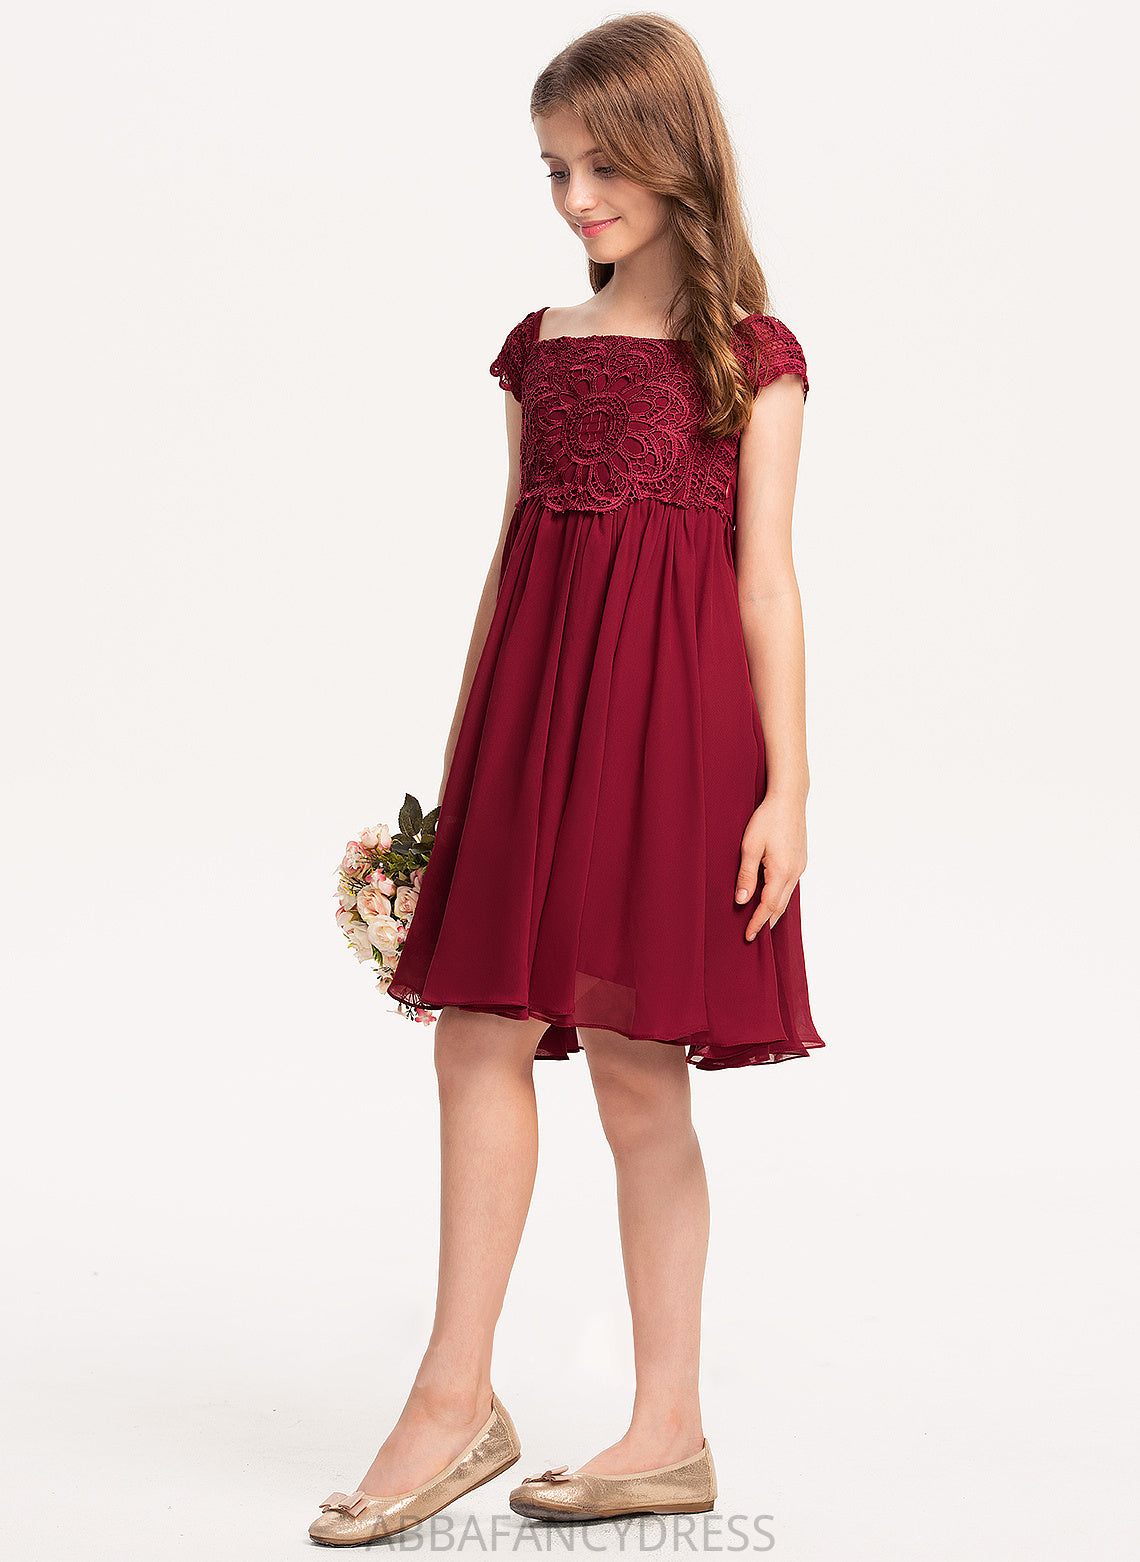 Lace Isabell Chiffon Bow(s) A-Line With Off-the-Shoulder Junior Bridesmaid Dresses Knee-Length